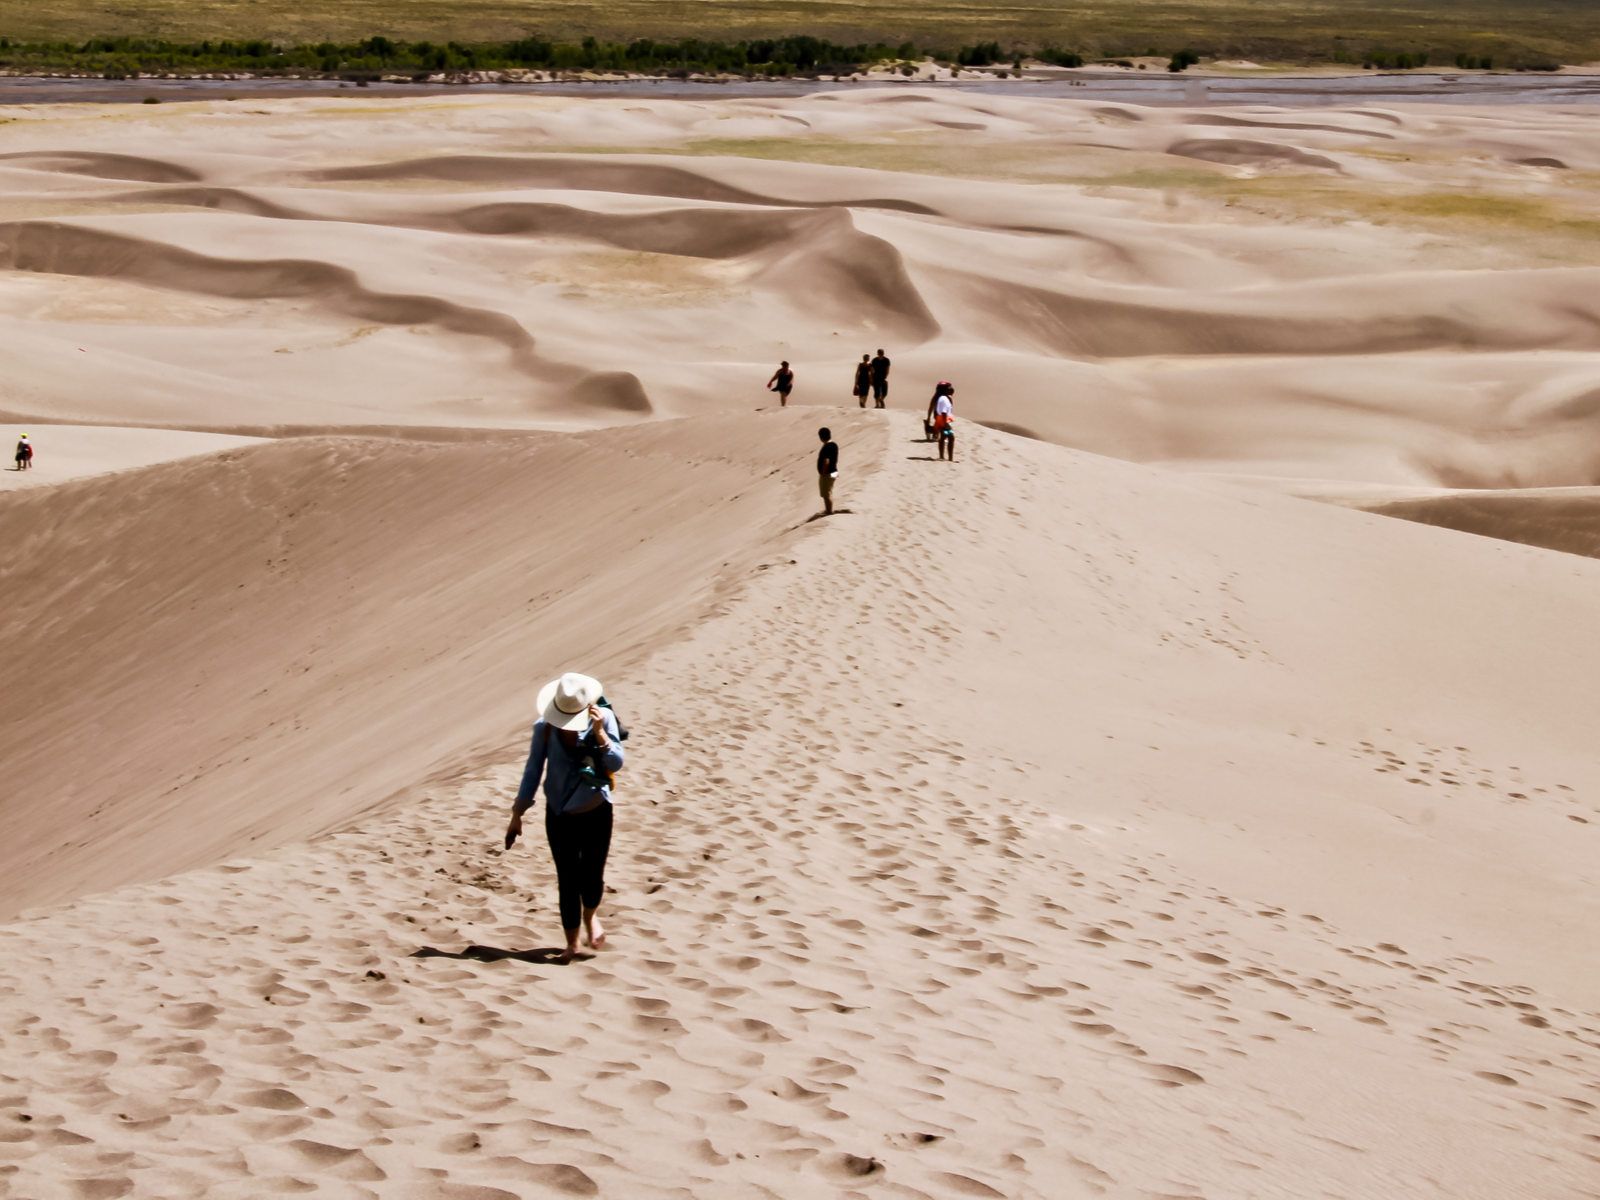 Hikers walking down the Great Sand Dunes for a piece on the most beautiful places in the US